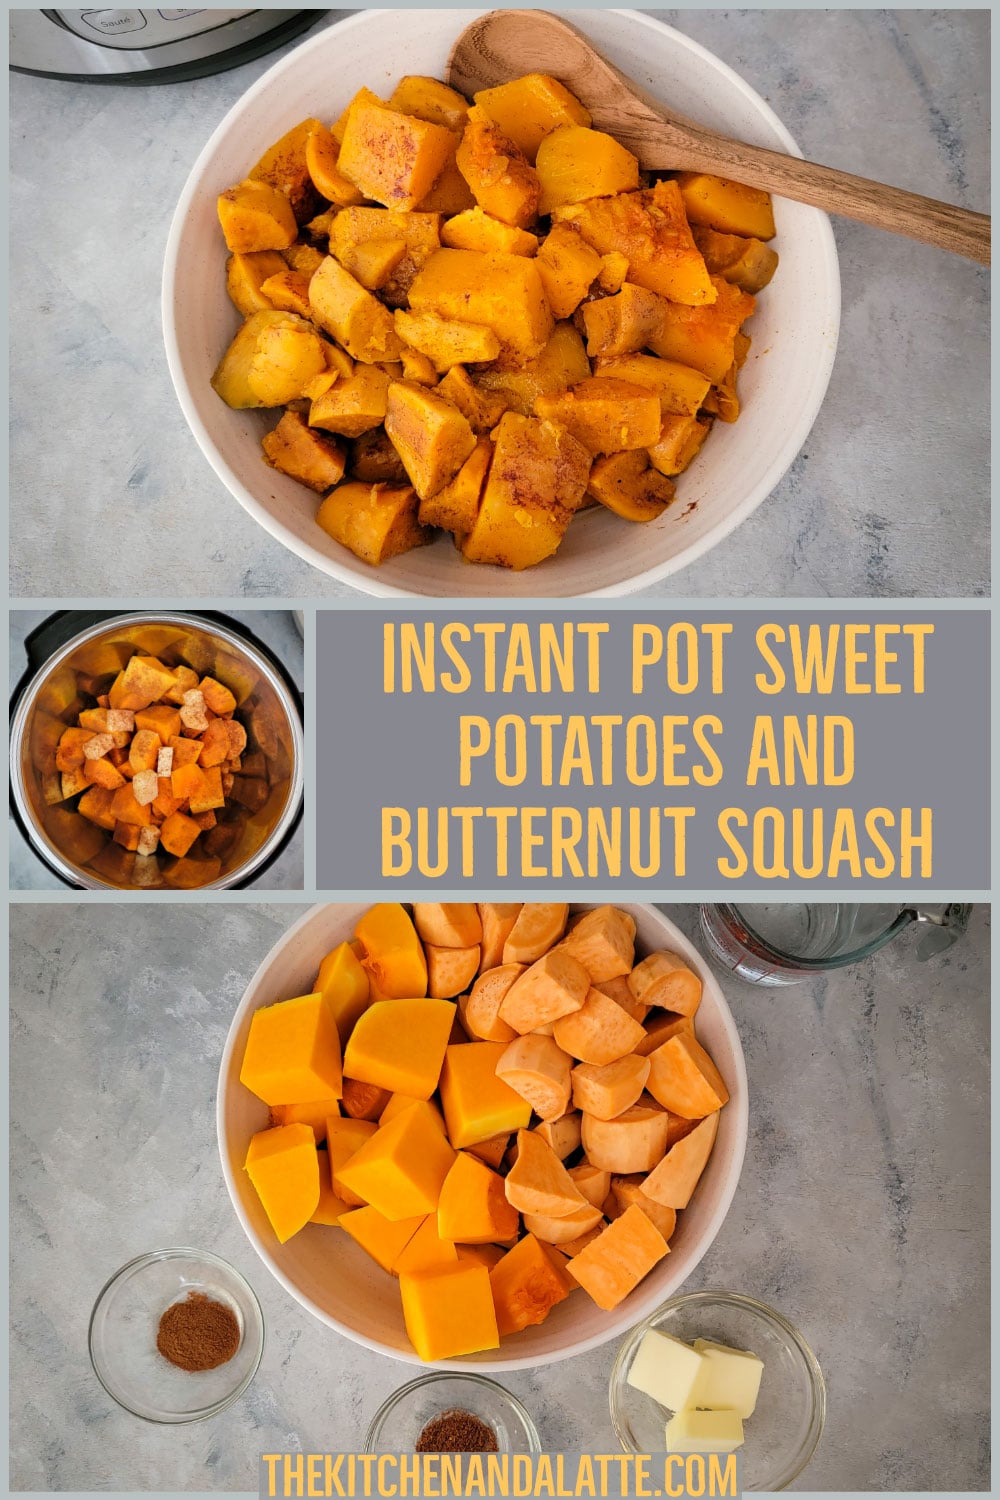 Pinterest image - Instant Pot sweet potatoes and butternut squash. 3 pictures - 1 is in the Instant Pot before cooking, 1 is all the ingredients in prep bowls and the other is prepared and ready to serve in a bowl.